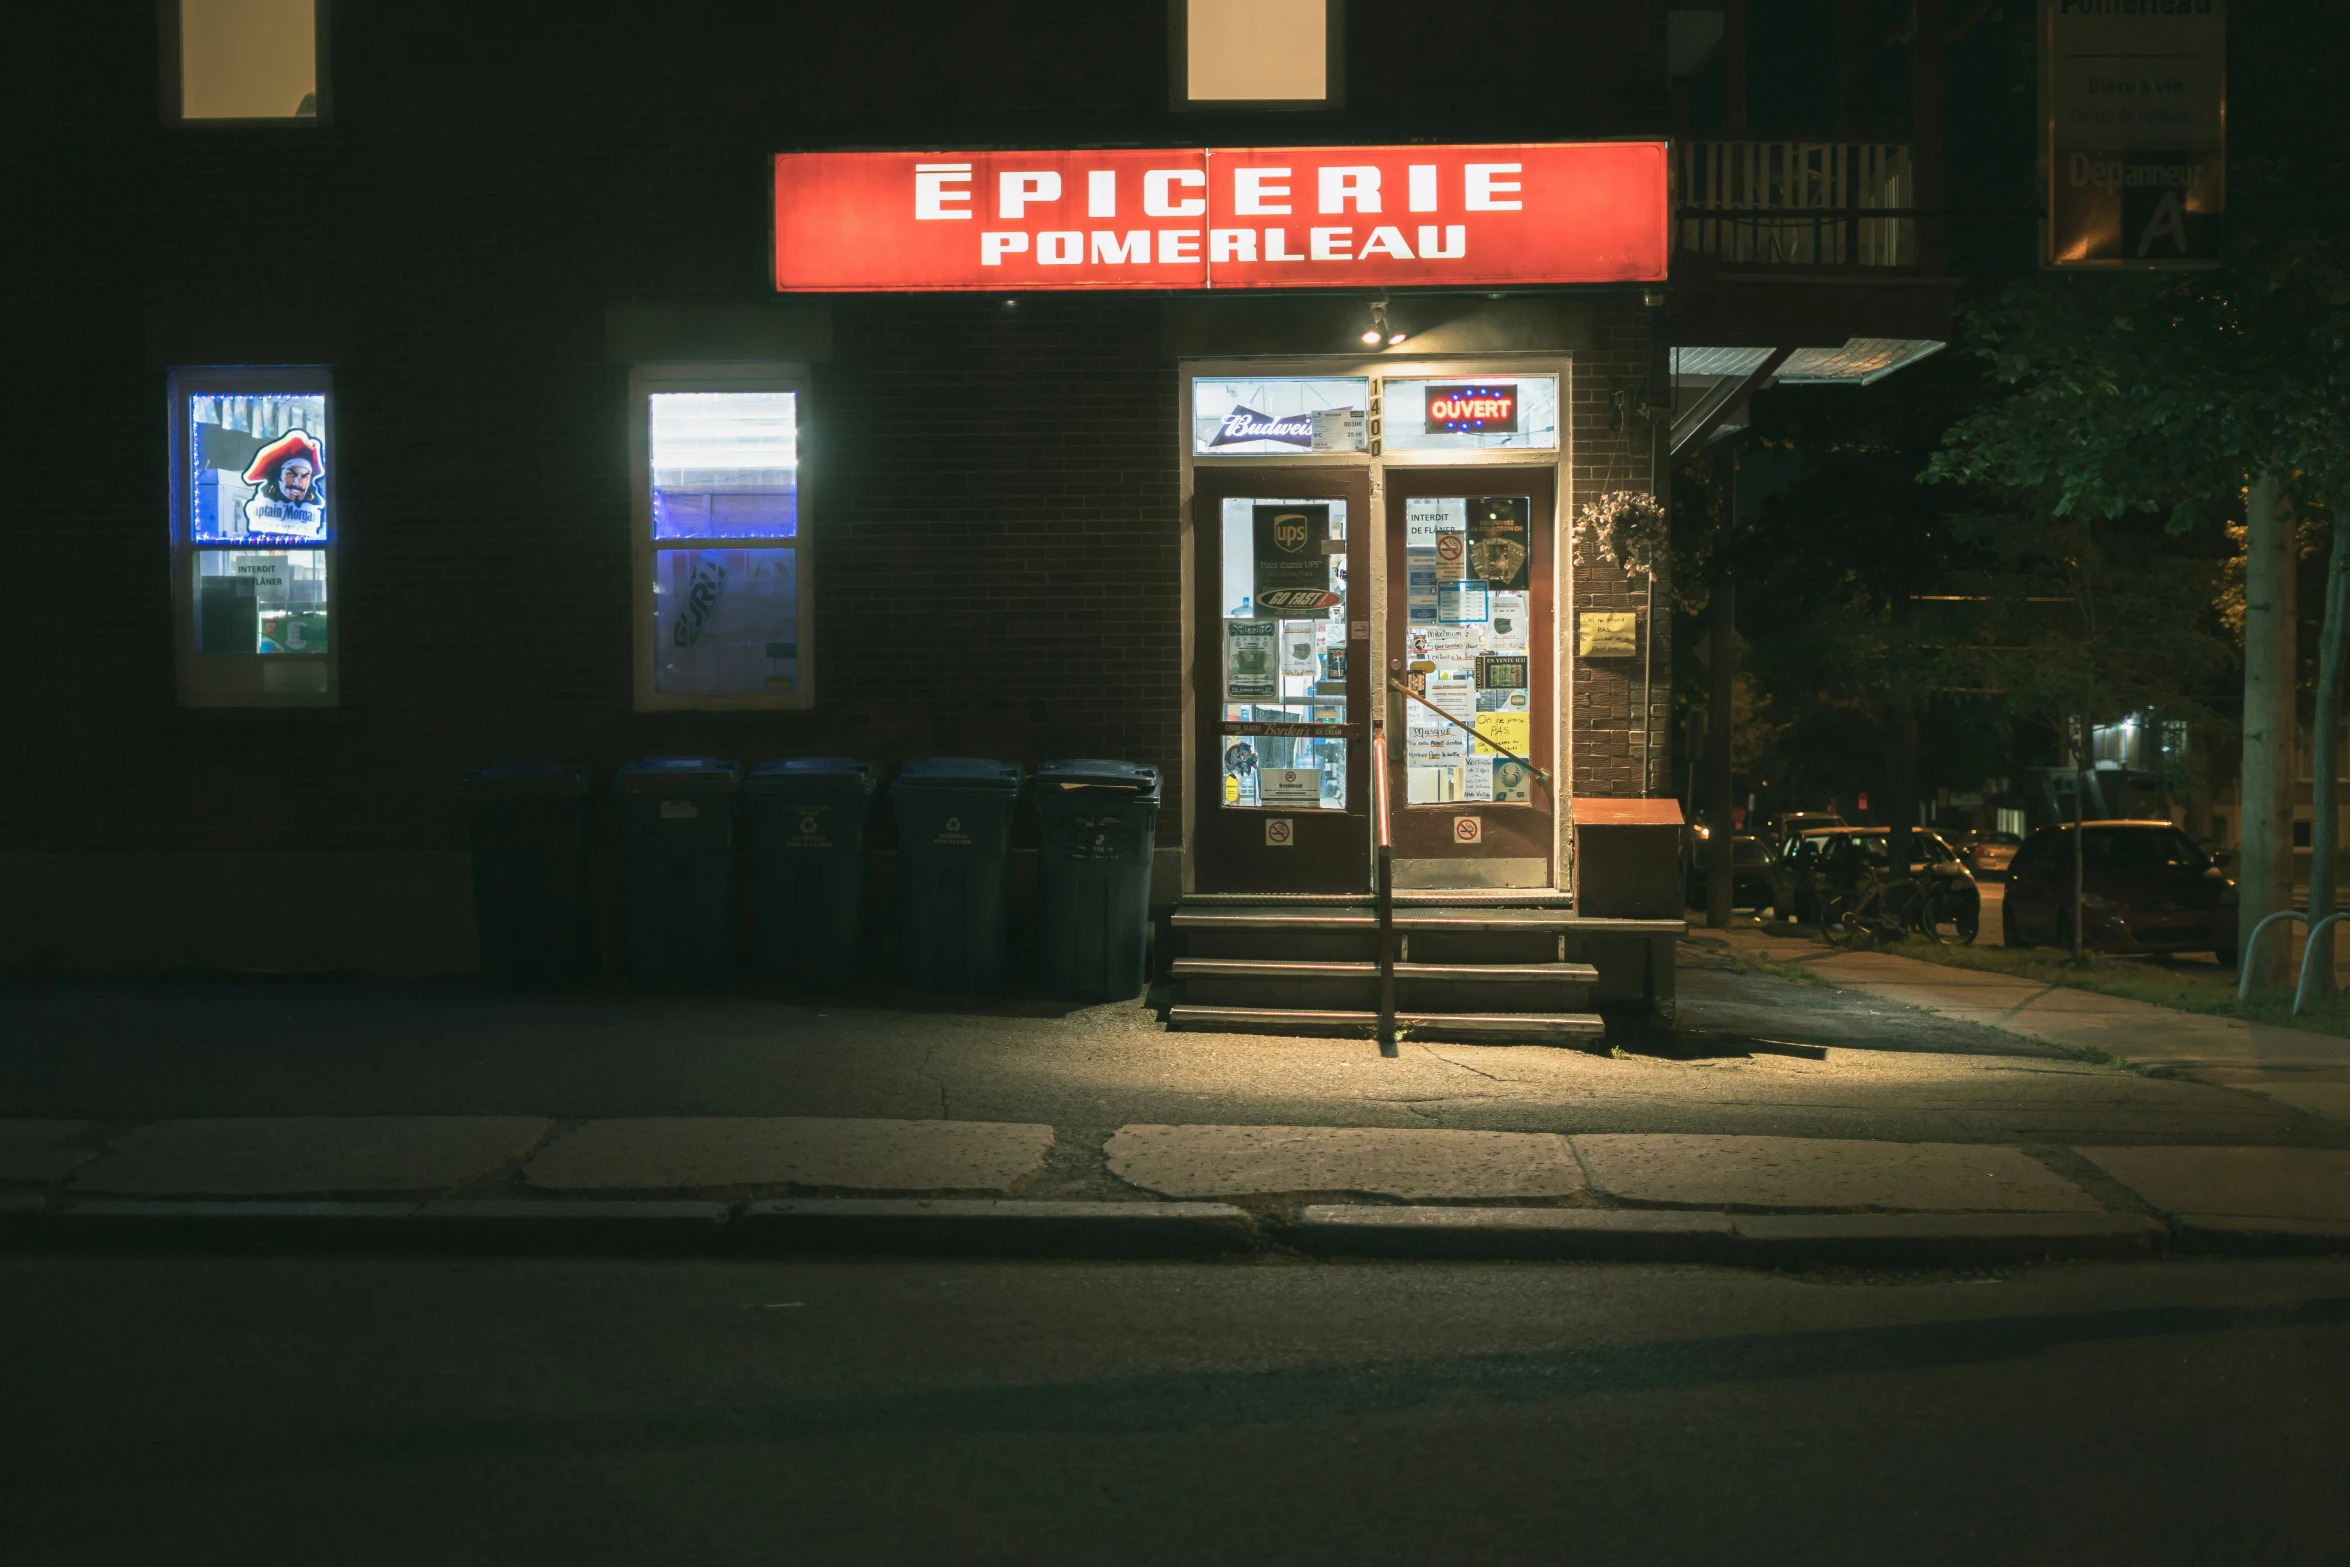 a dark city street at night with the words epilerie primenelaire on the side